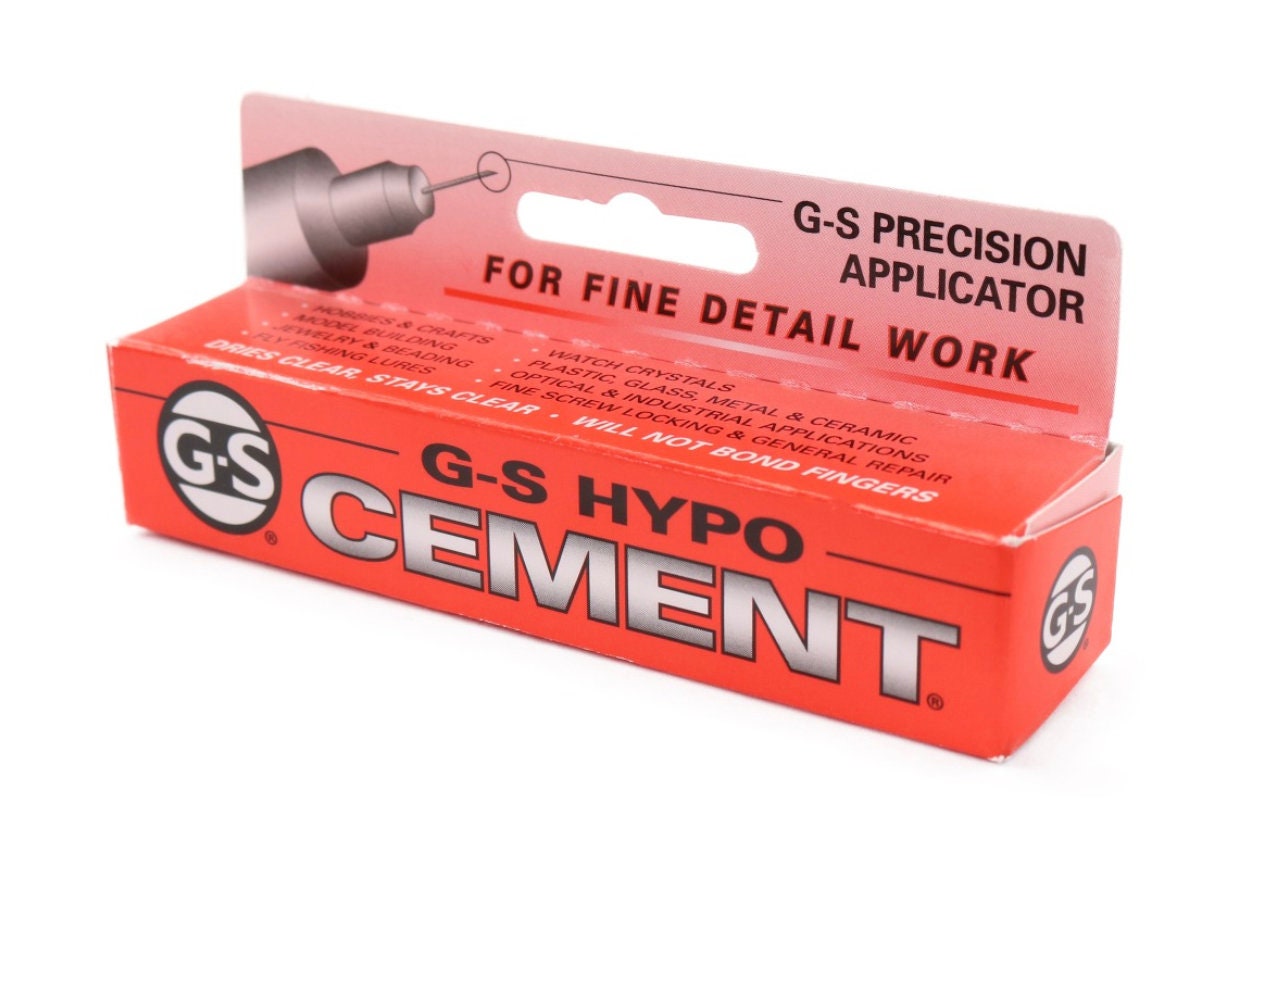  GS Supplies G-S Hypo Cement, 1 Count (Pack of 1